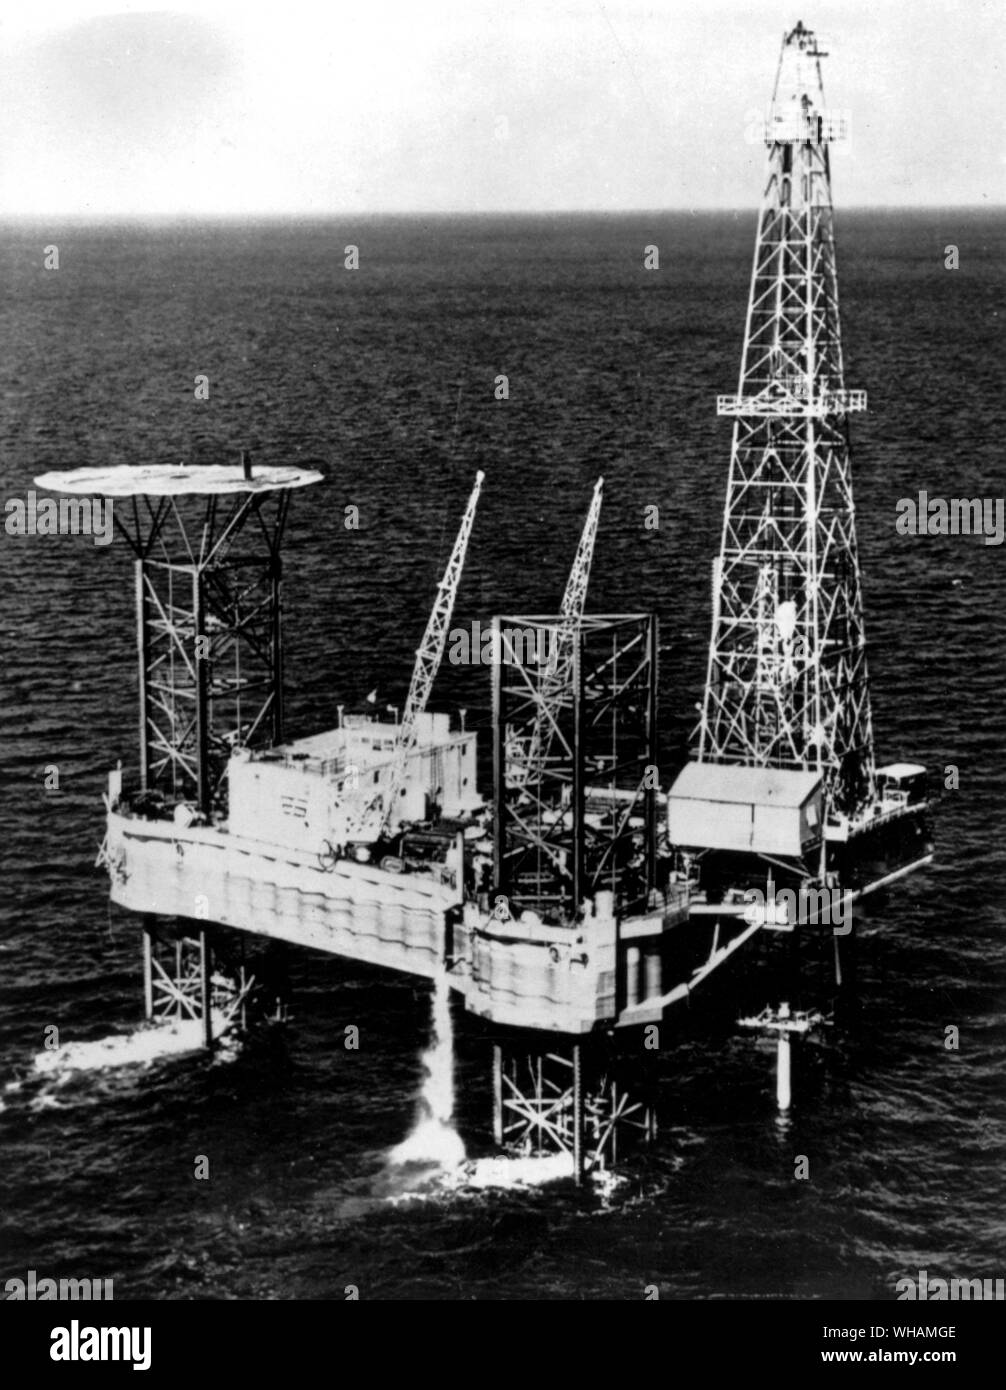 New Gulf Drilling Tower. The Vinegarroon, a huge offshore drilling tower, stands in the Gulf of Mexico, about 12 miles off shore from Cameron Louisiana. The unit was built by R G Le Torneau of Longview Texas for the Zapata off shore company of Houston at a cost of one and a quarter million pounds. The equipment can drill to a depth of 20,000 feet in water up to 100 feet deep. There is a heliport on a raised platform at the left.. 12th May 1957 Stock Photo